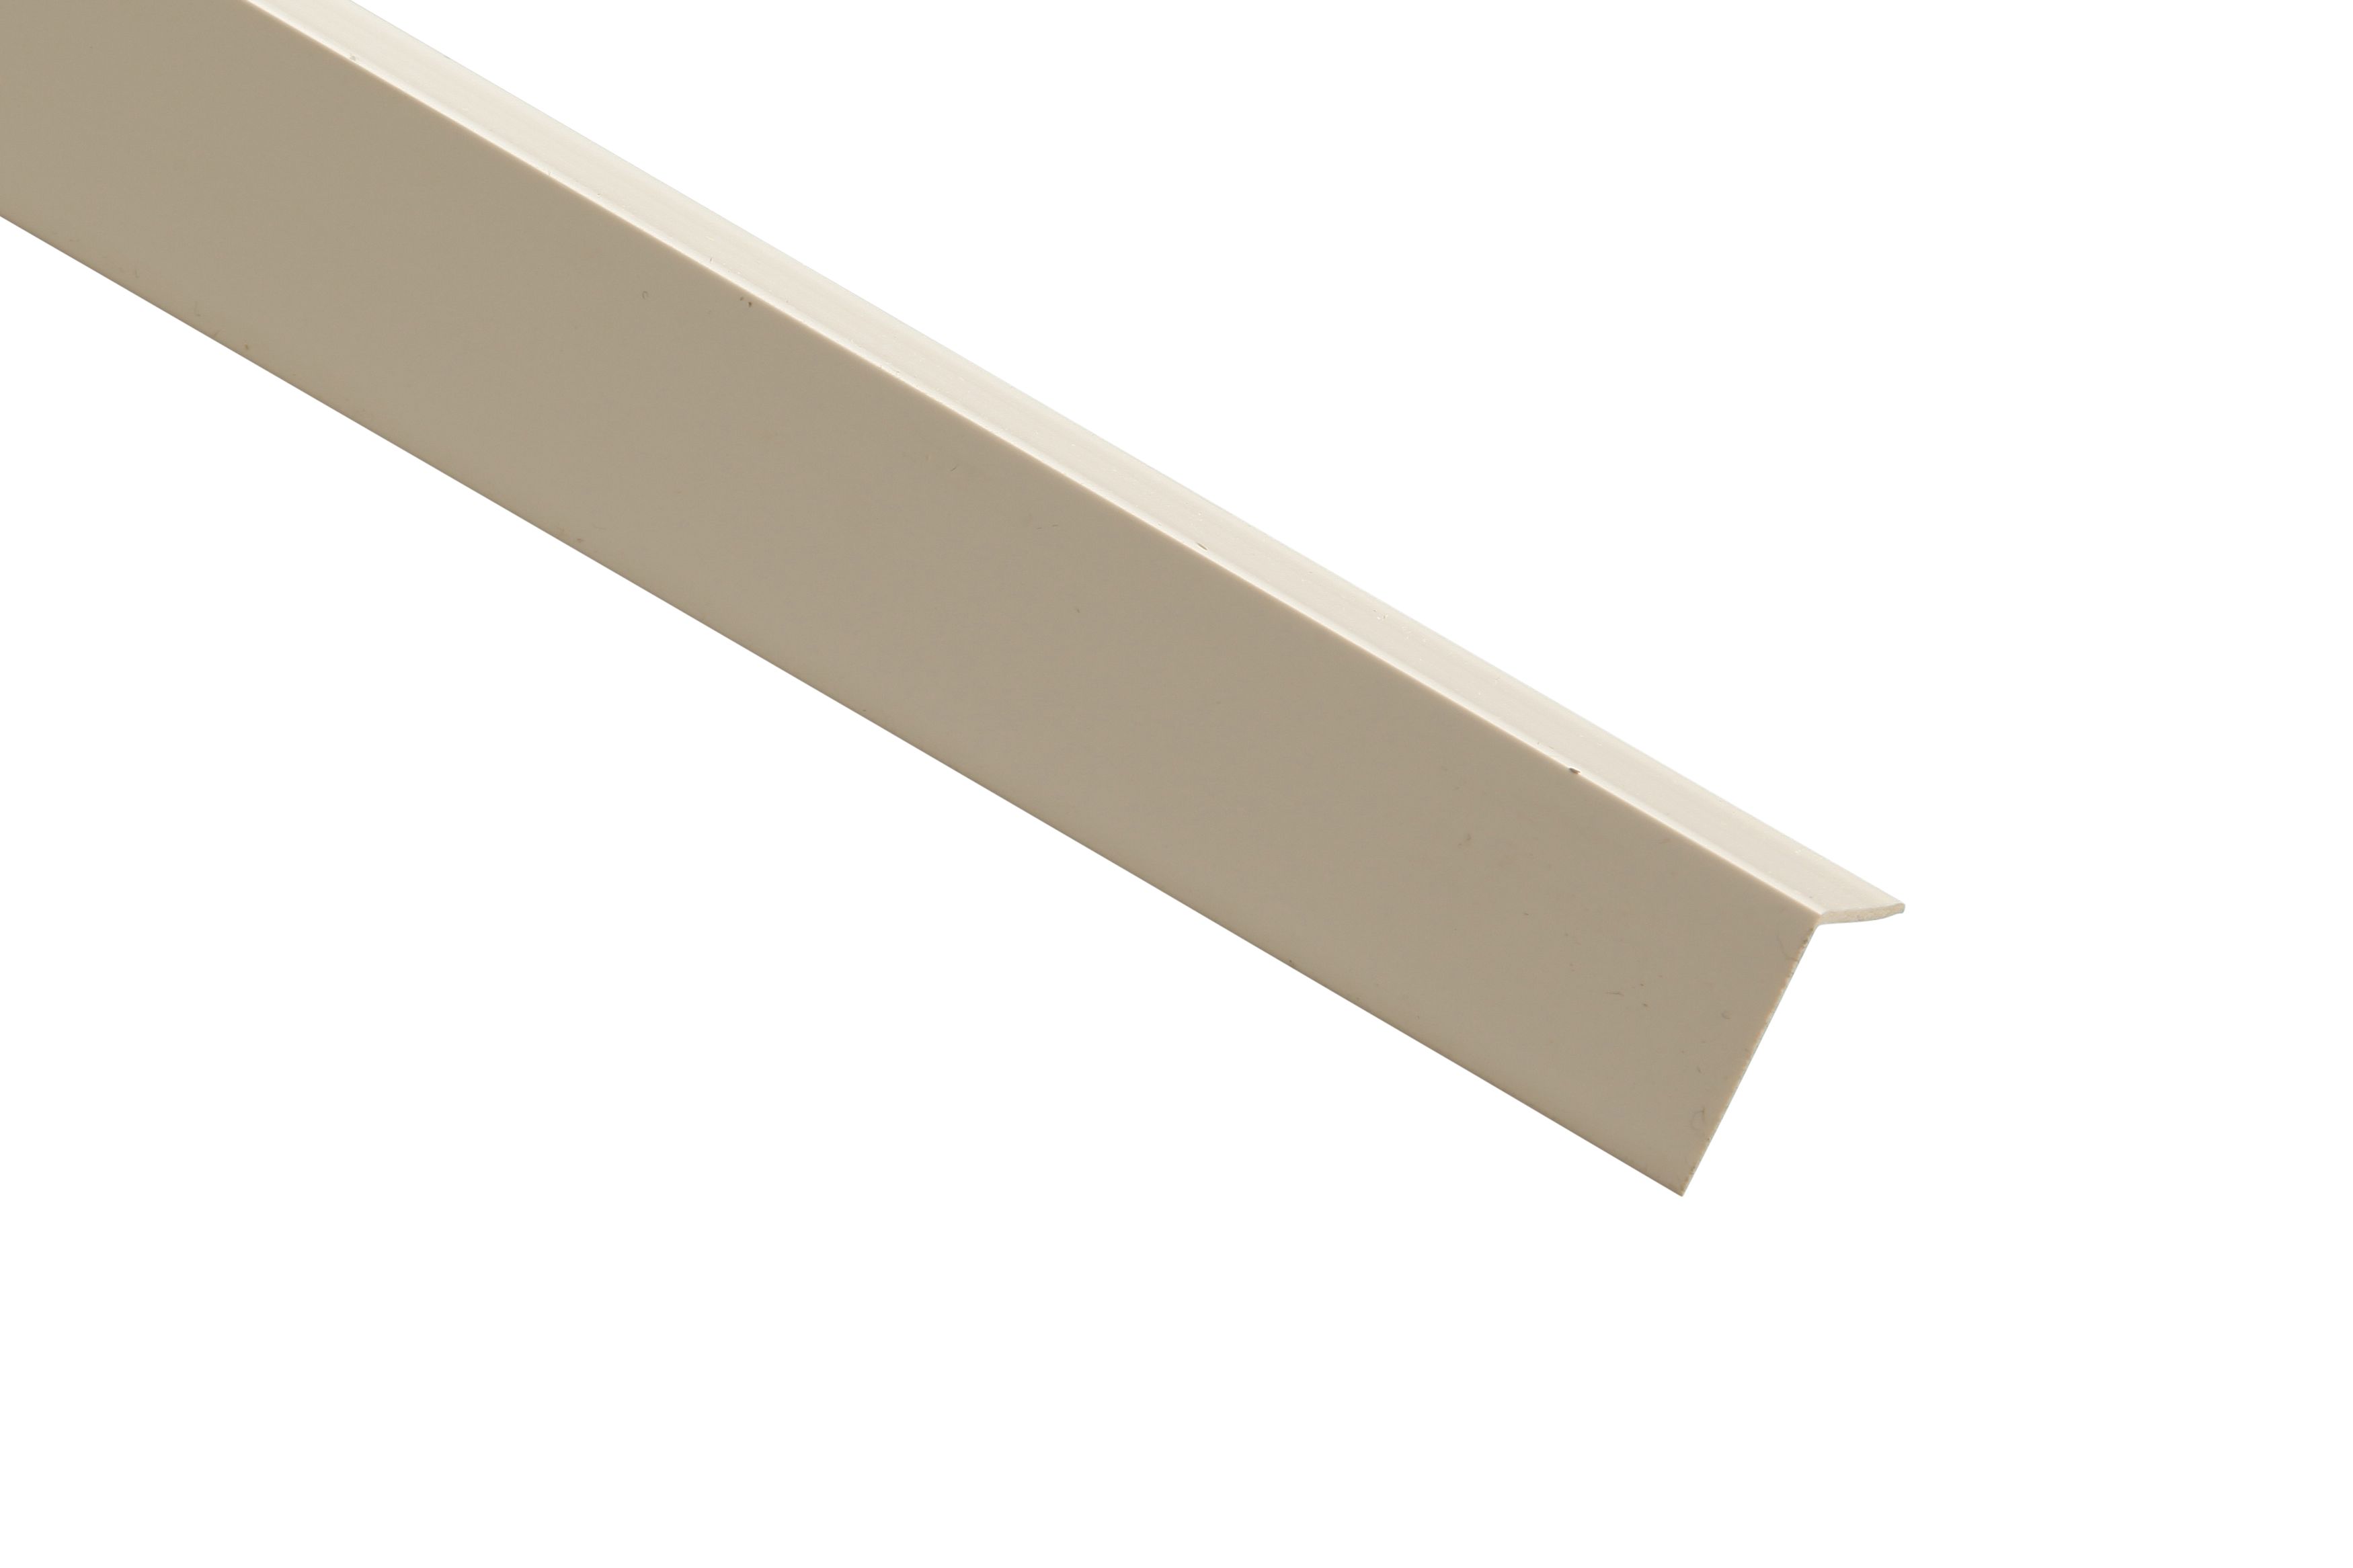 Image of Wickes PVC Angle Moulding - 12 x 12 x 2400mm